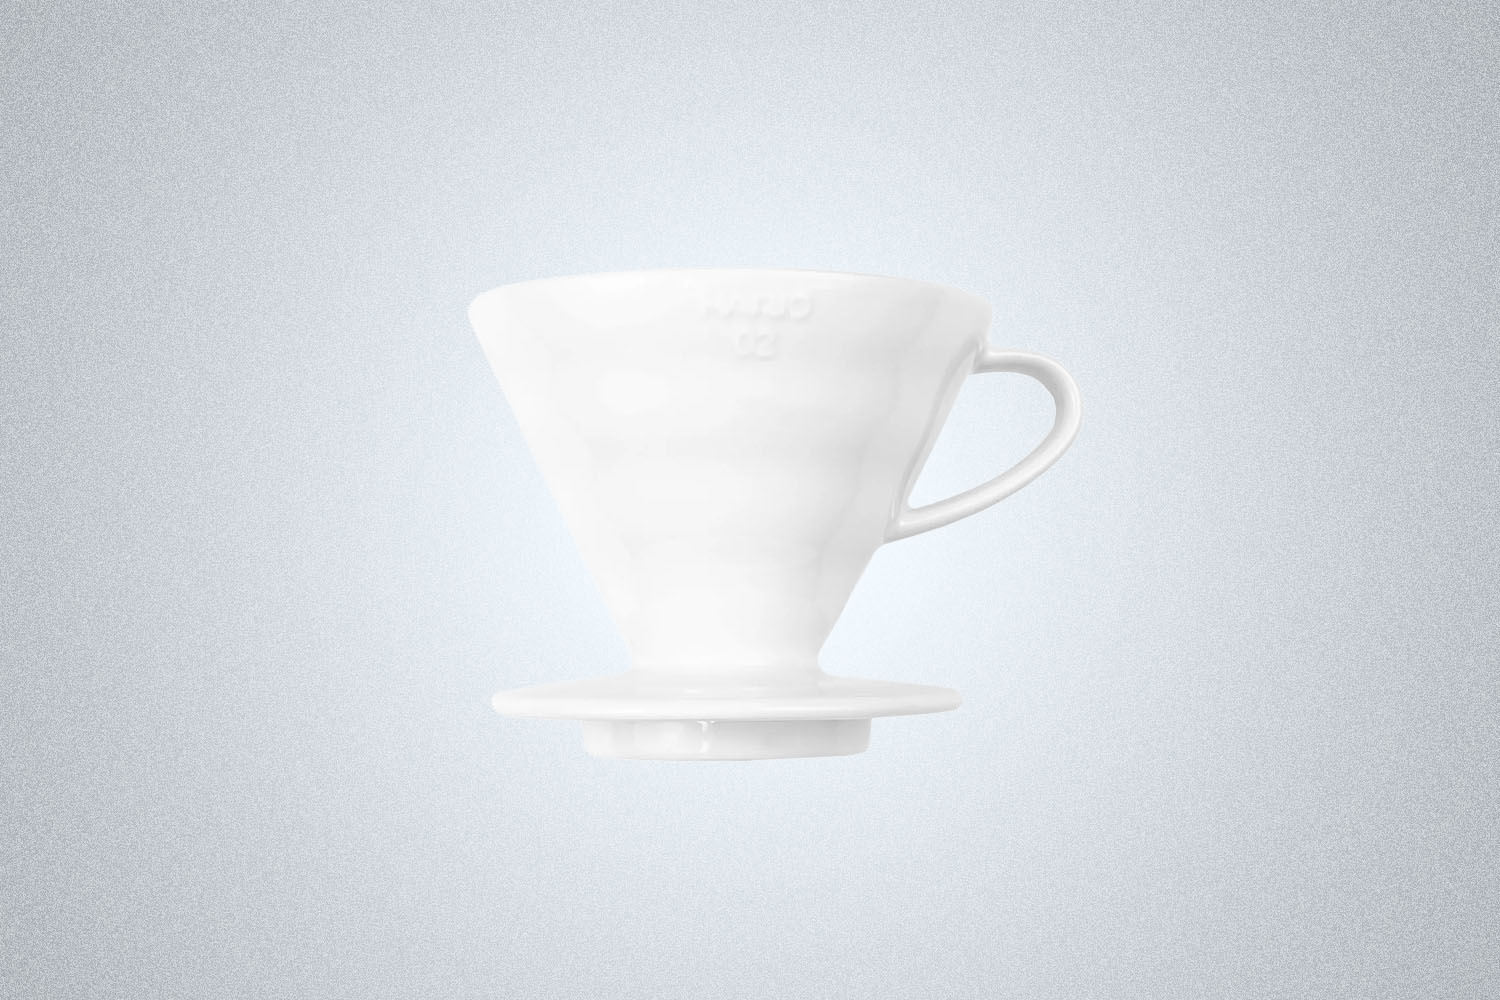 The Hario V60 Pour Over Coffee Maker on a gray background